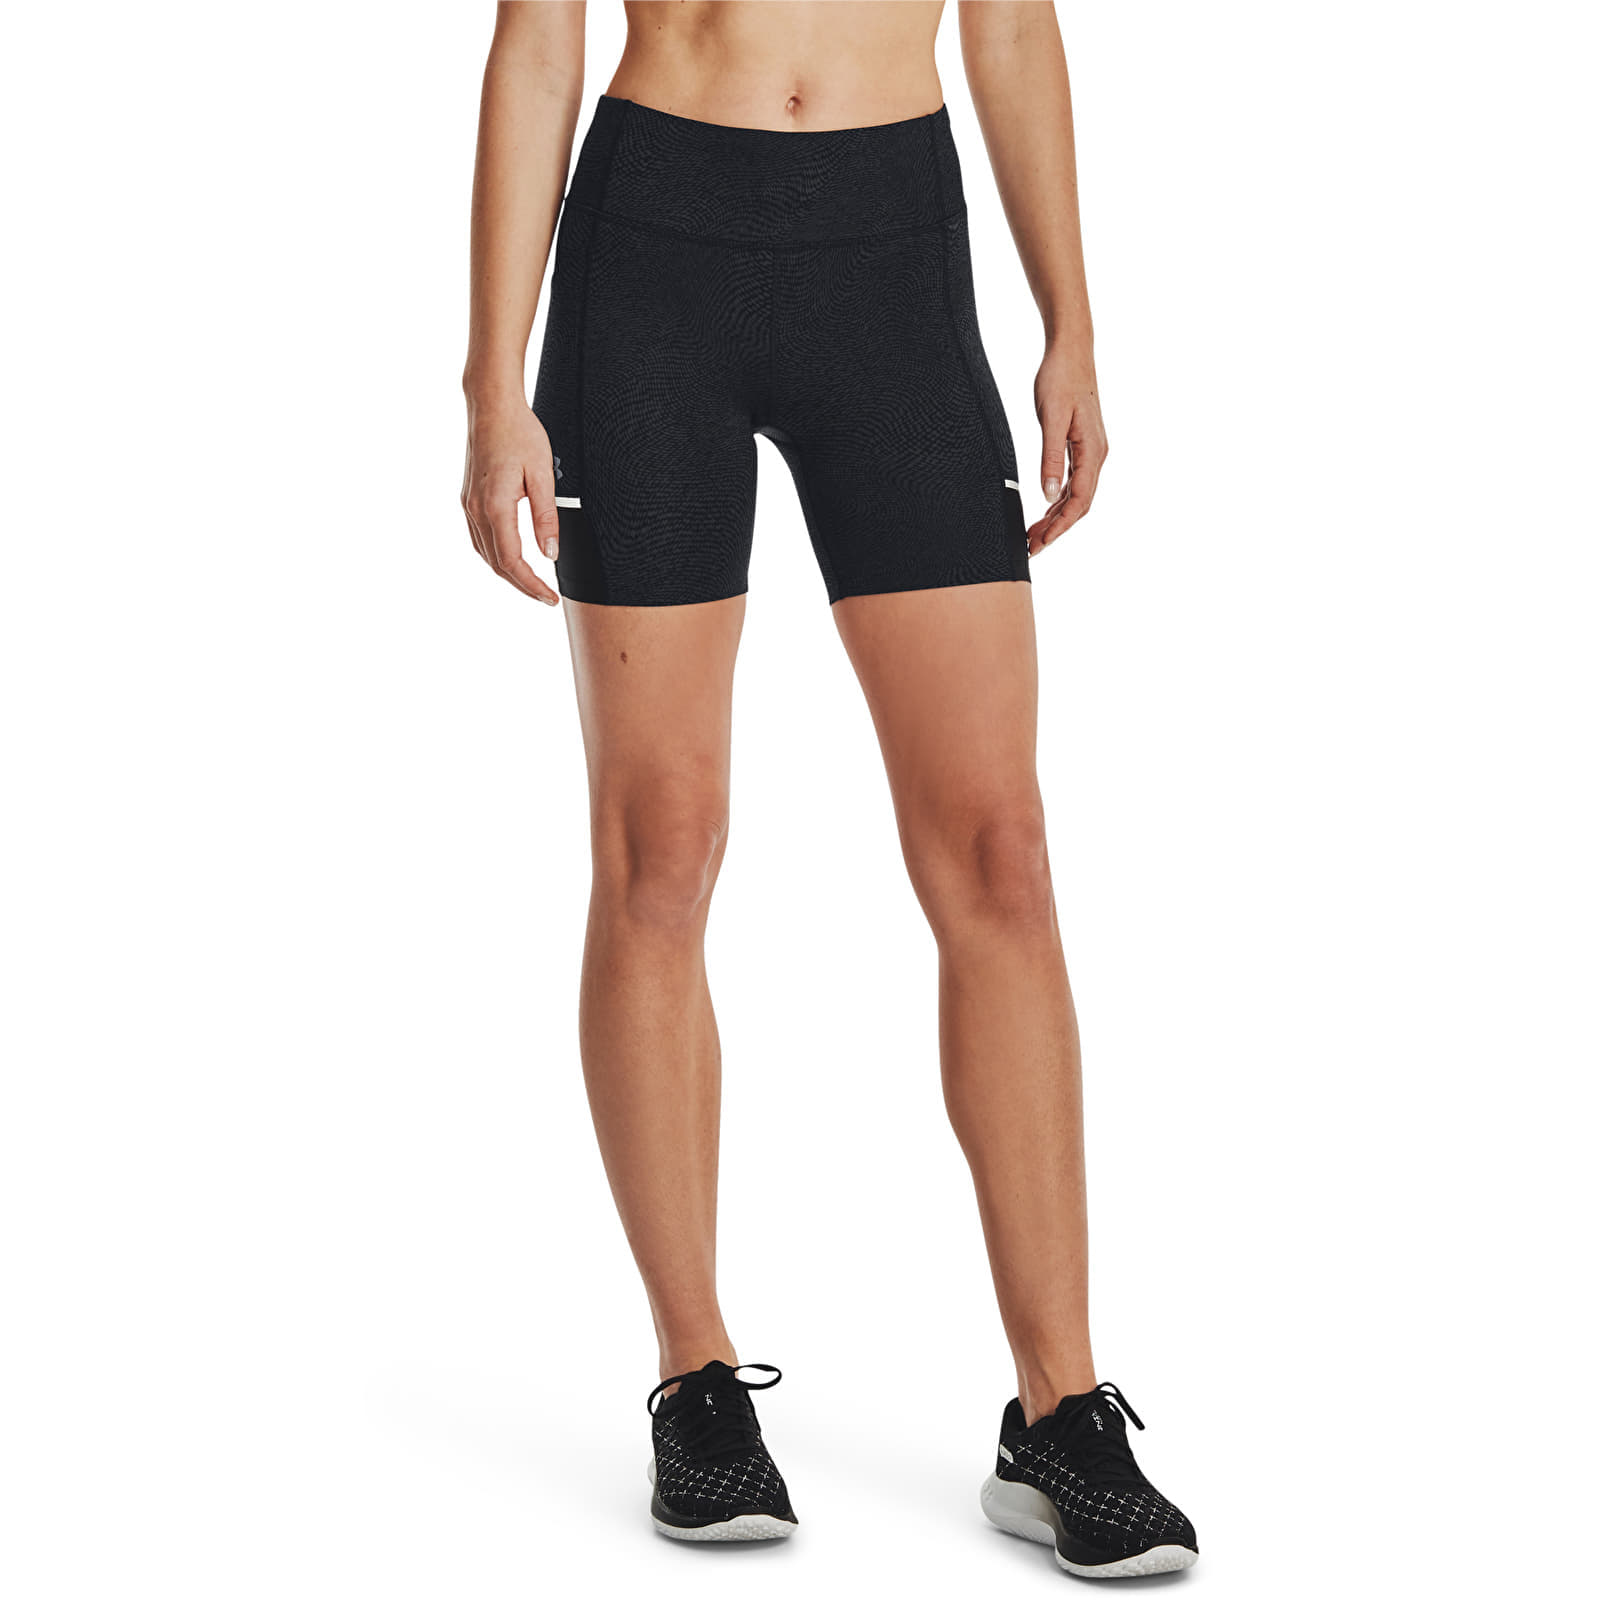 Under Armour Fly Fast 3.0 Half Tight Black